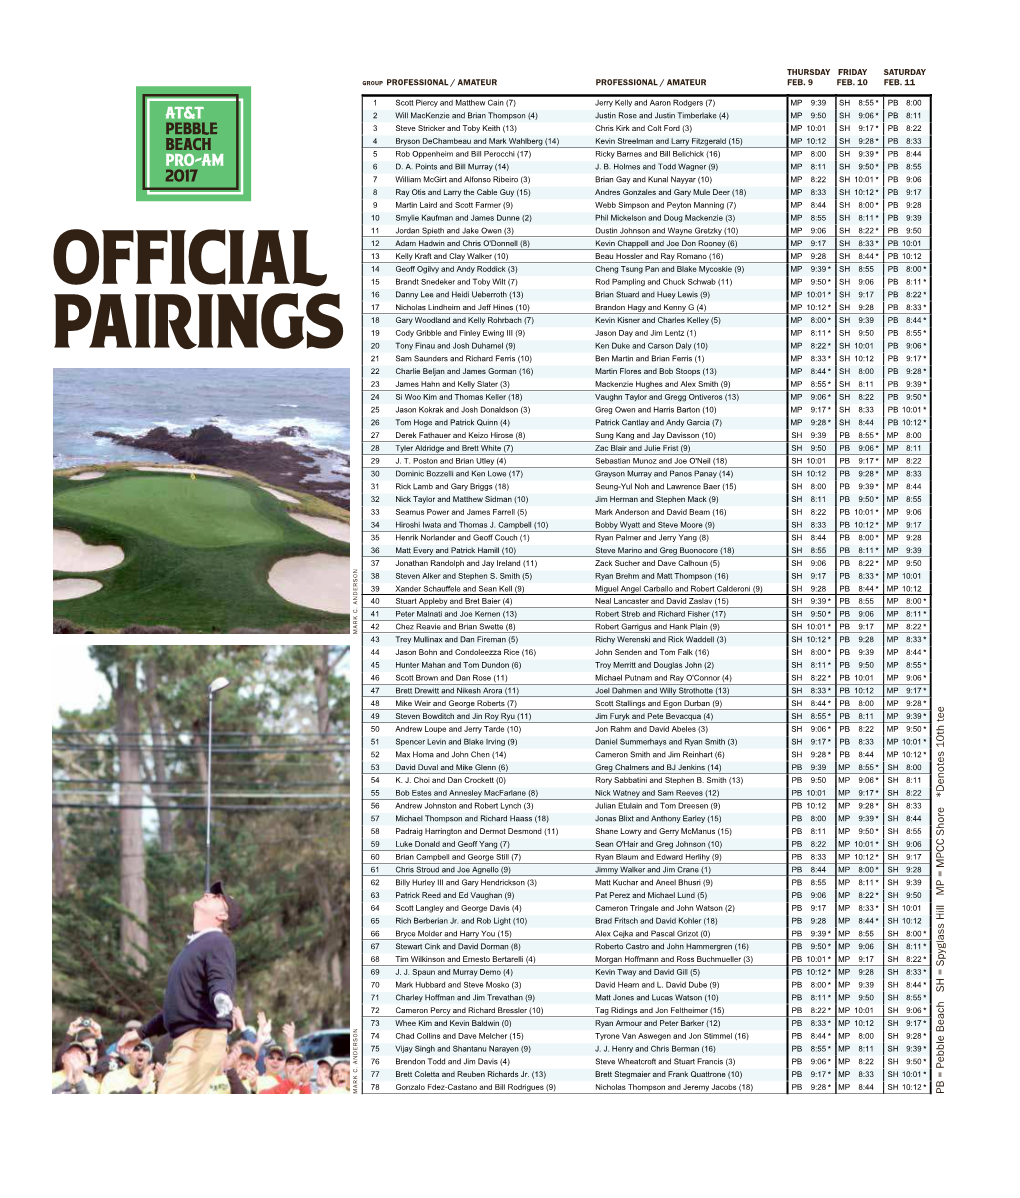 Official Pairings